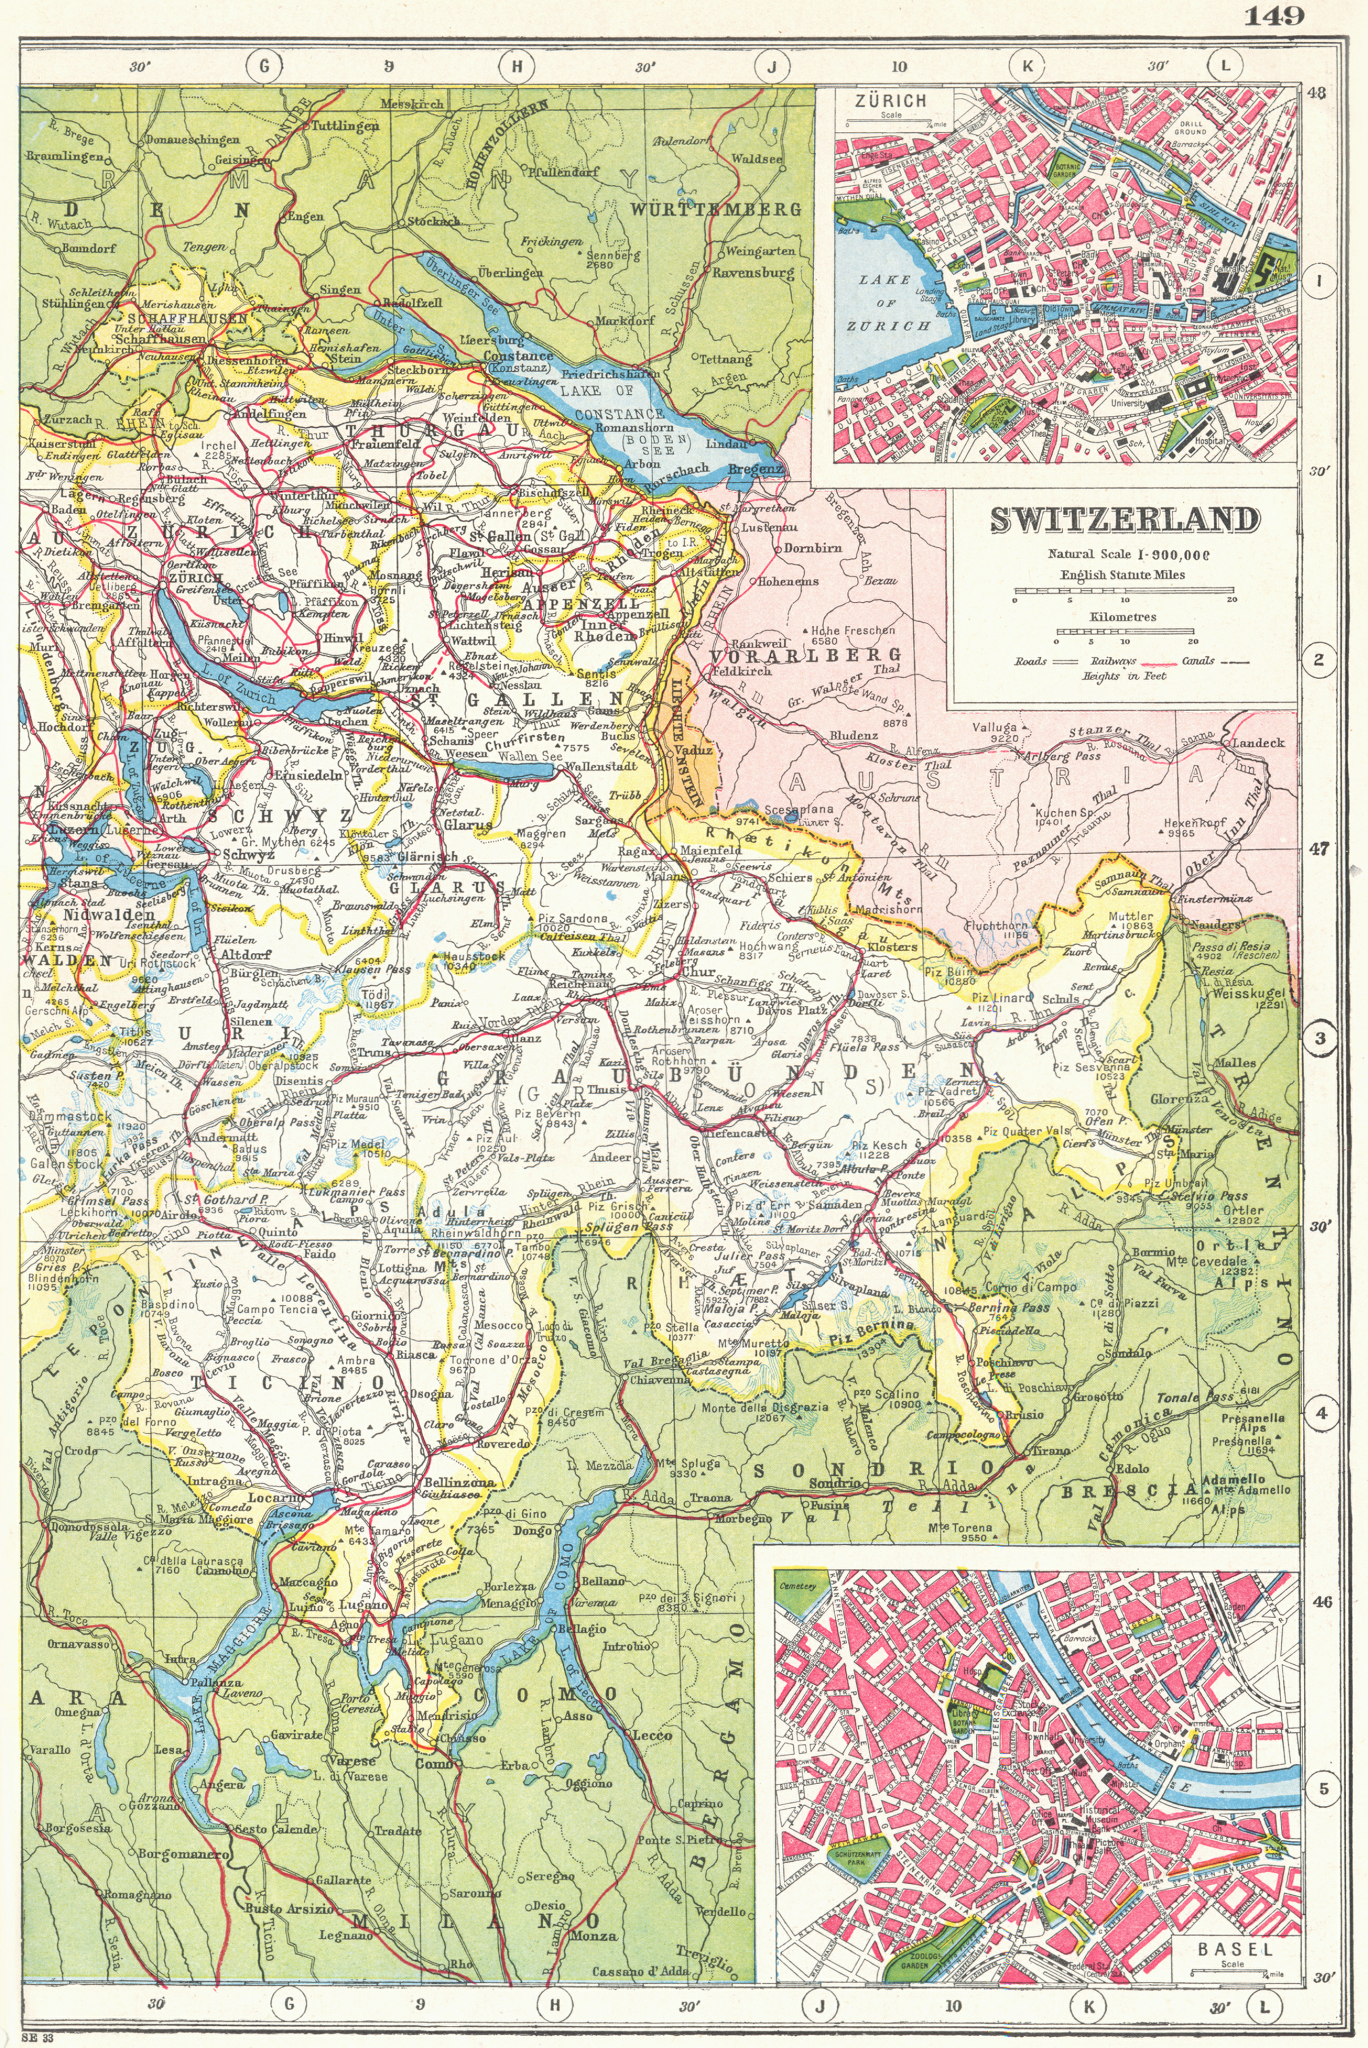 Associate Product SWITZERLAND EAST. inset plans of Zurich & Basel Basle. HARMSWORTH 1920 old map